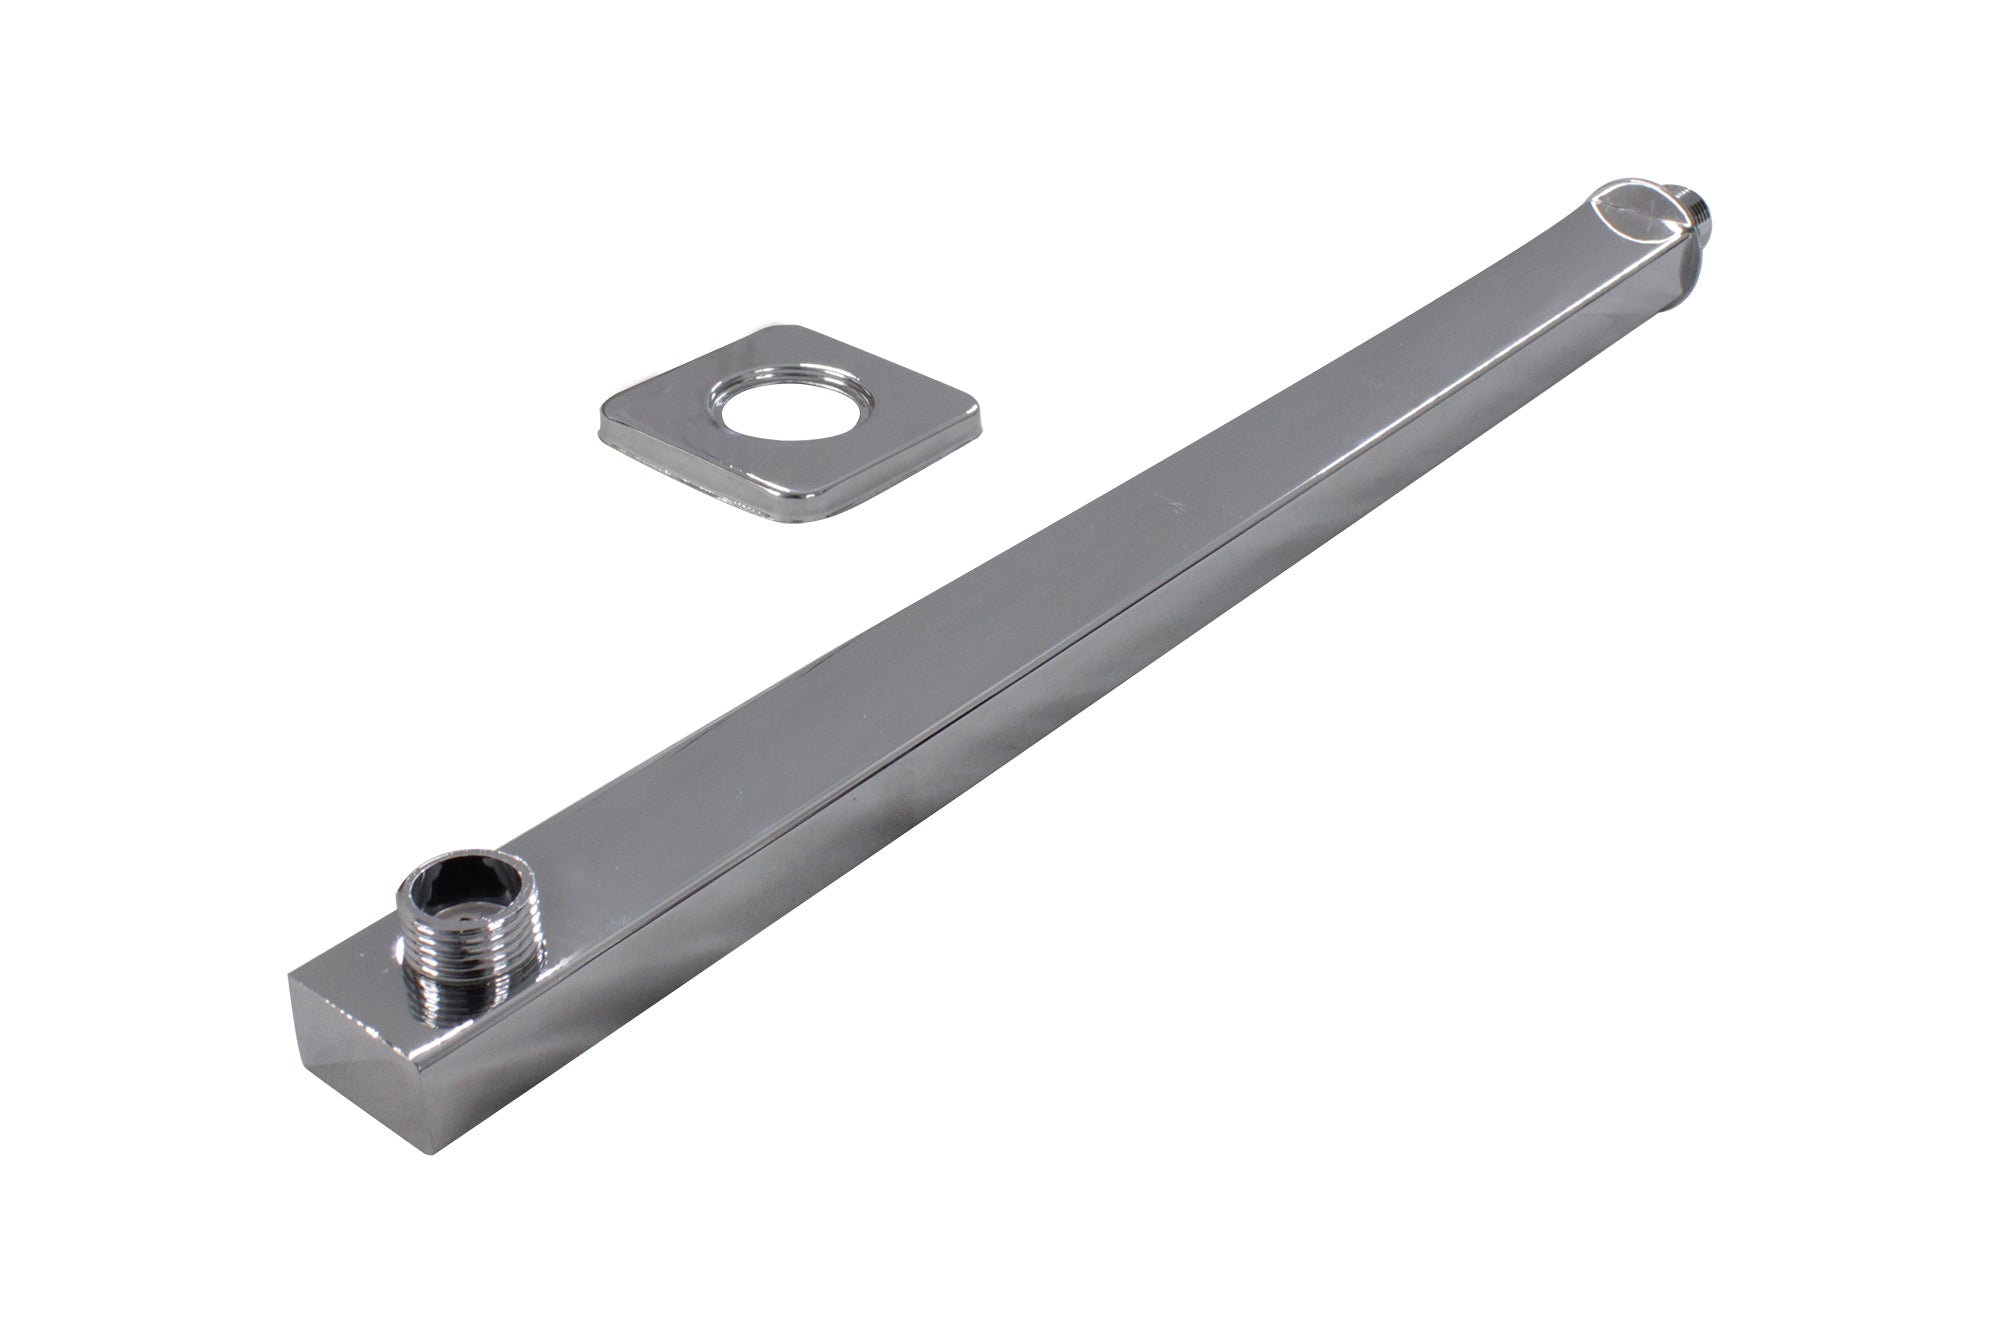 LMA Branded Wall-Mounted Rectangular Shower Arm with Flange